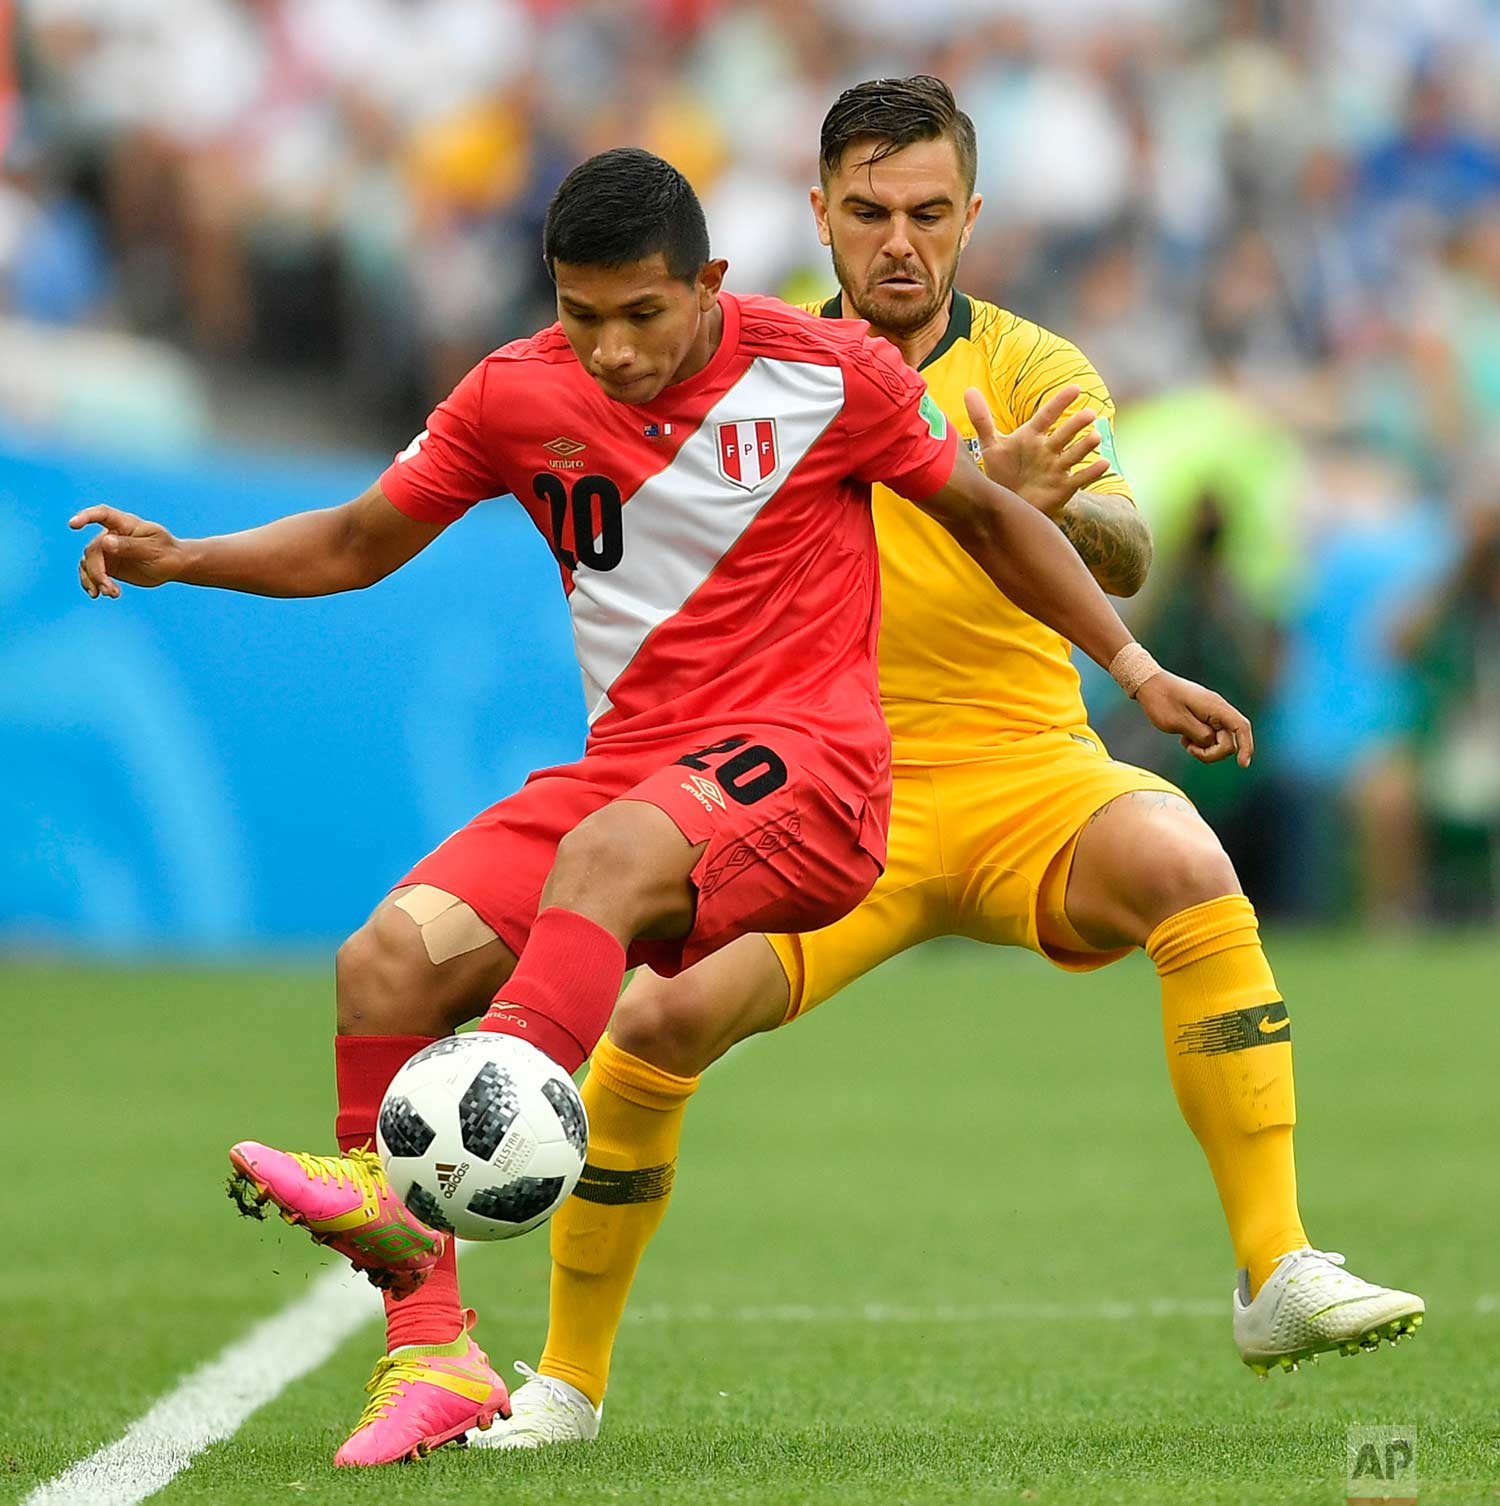  Peru's Edison Flores, left, and Australia's Joshua Risdon challenge for the ball during the group C match between Australia and Peru, at the 2018 soccer World Cup in the Fisht Stadium in Sochi, Russia, Tuesday, June 26, 2018. (AP Photo/Martin Meissn